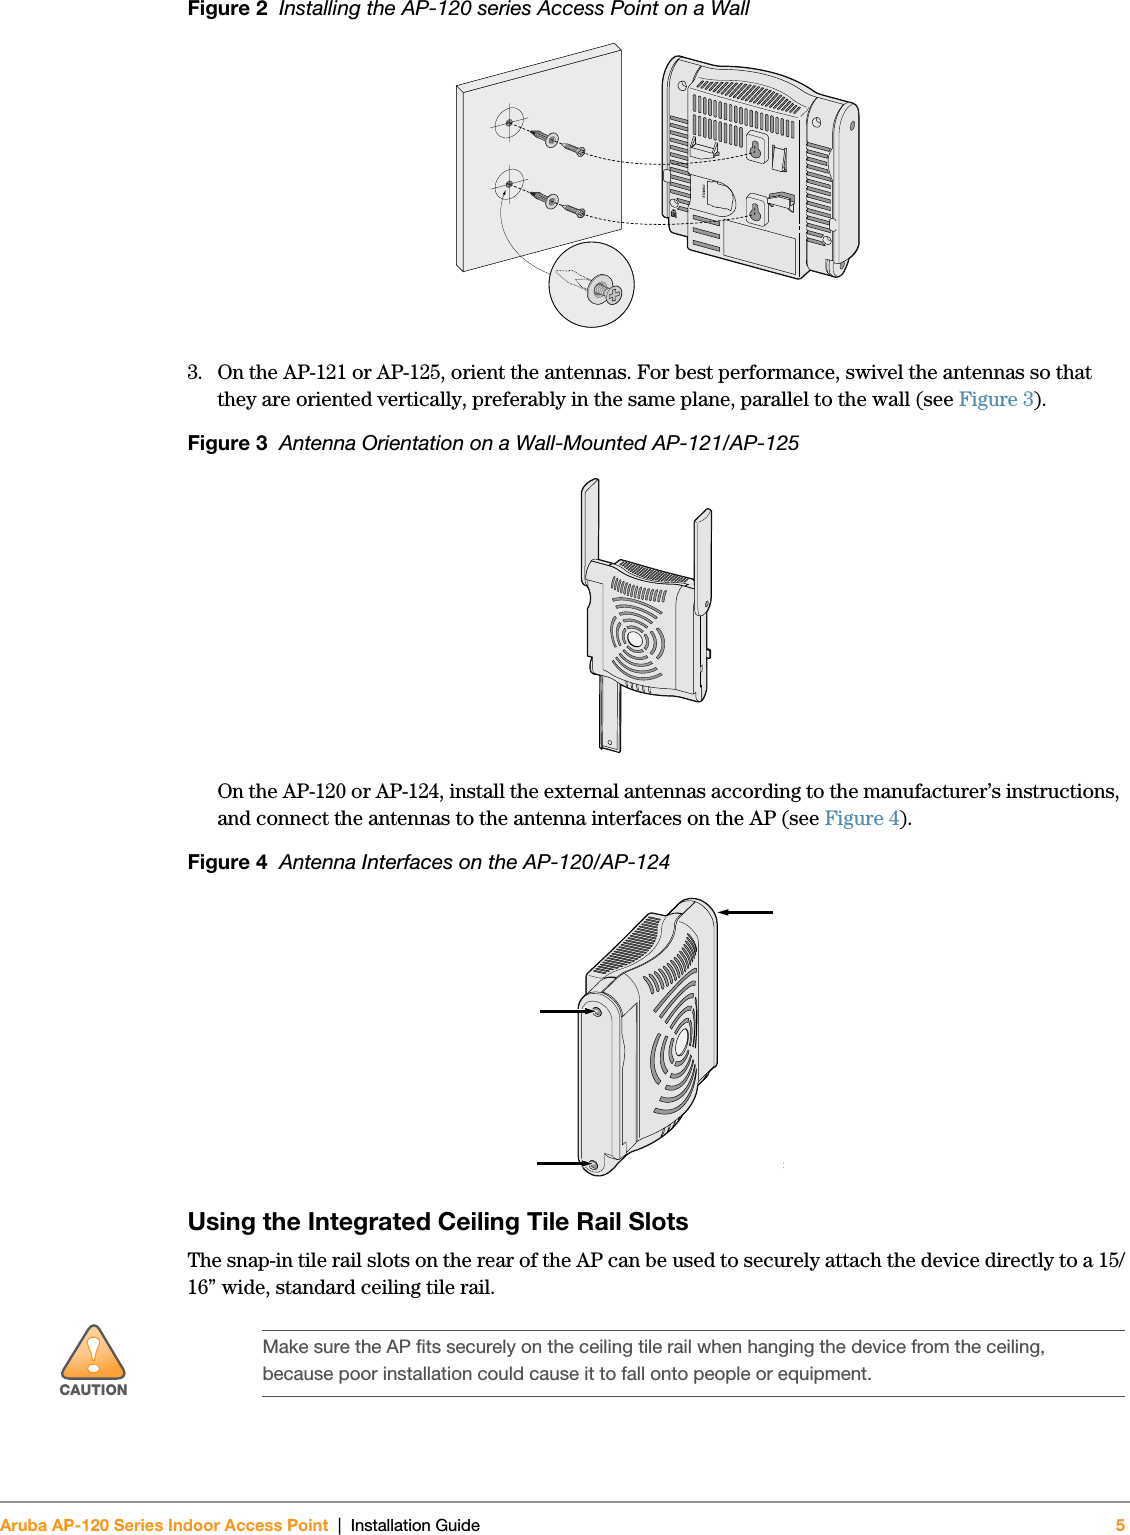 Aruba AP-120 Series Indoor Access Point | Installation Guide 5 Figure 2  Installing the AP-120 series Access Point on a Wall3. On the AP-121 or AP-125, orient the antennas. For best performance, swivel the antennas so that they are oriented vertically, preferably in the same plane, parallel to the wall (see Figure 3).Figure 3  Antenna Orientation on a Wall-Mounted AP-121/AP-125On the AP-120 or AP-124, install the external antennas according to the manufacturer’s instructions, and connect the antennas to the antenna interfaces on the AP (see Figure 4).Figure 4  Antenna Interfaces on the AP-120/AP-124Using the Integrated Ceiling Tile Rail SlotsThe snap-in tile rail slots on the rear of the AP can be used to securely attach the device directly to a 15/16” wide, standard ceiling tile rail.ap!CAUTIONMake sure the AP fits securely on the ceiling tile rail when hanging the device from the ceiling, because poor installation could cause it to fall onto people or equipment.